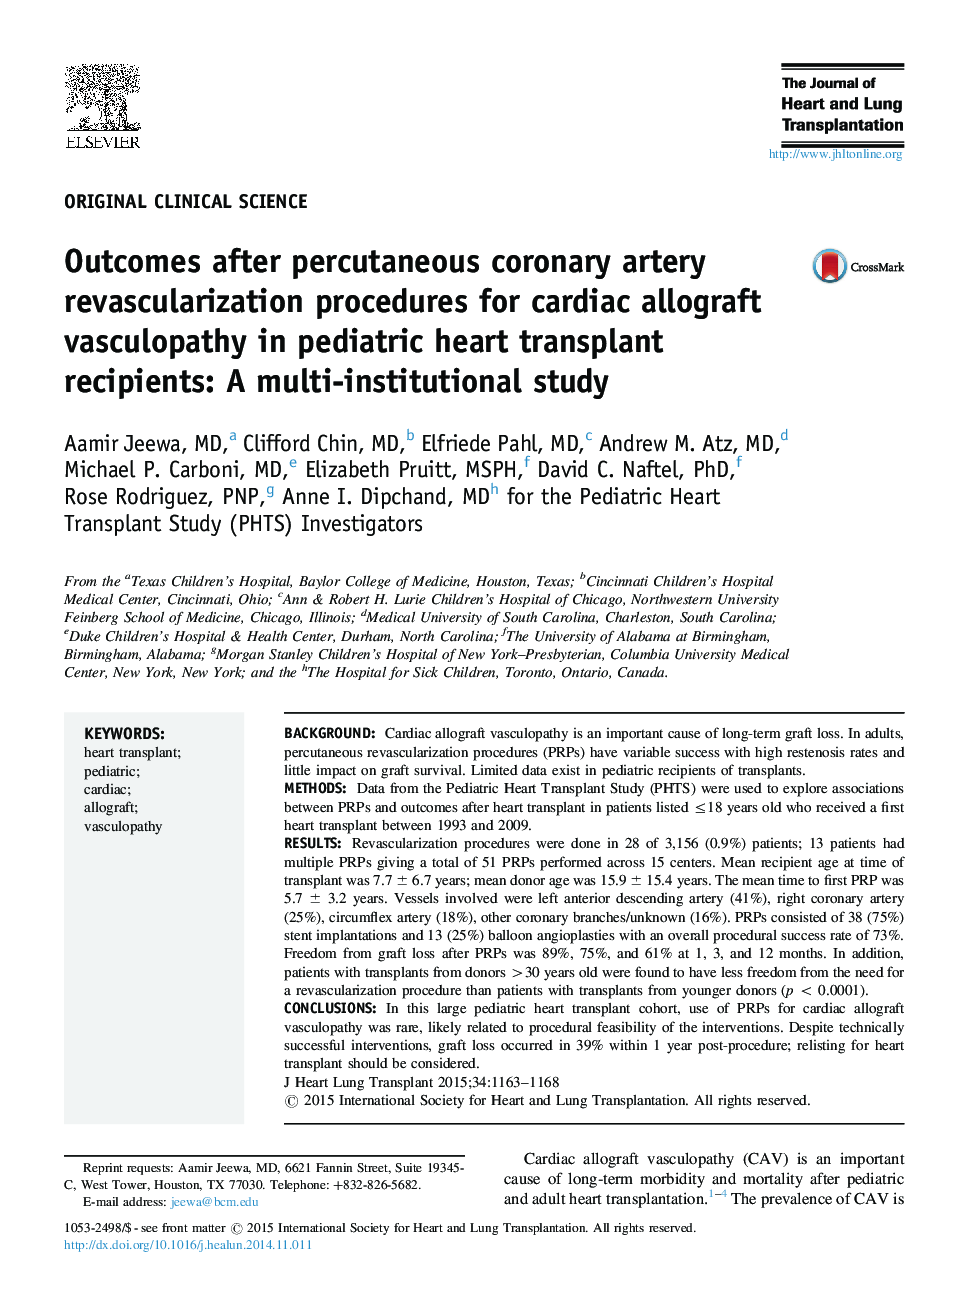 Outcomes after percutaneous coronary artery revascularization procedures for cardiac allograft vasculopathy in pediatric heart transplant recipients: A multi-institutional study